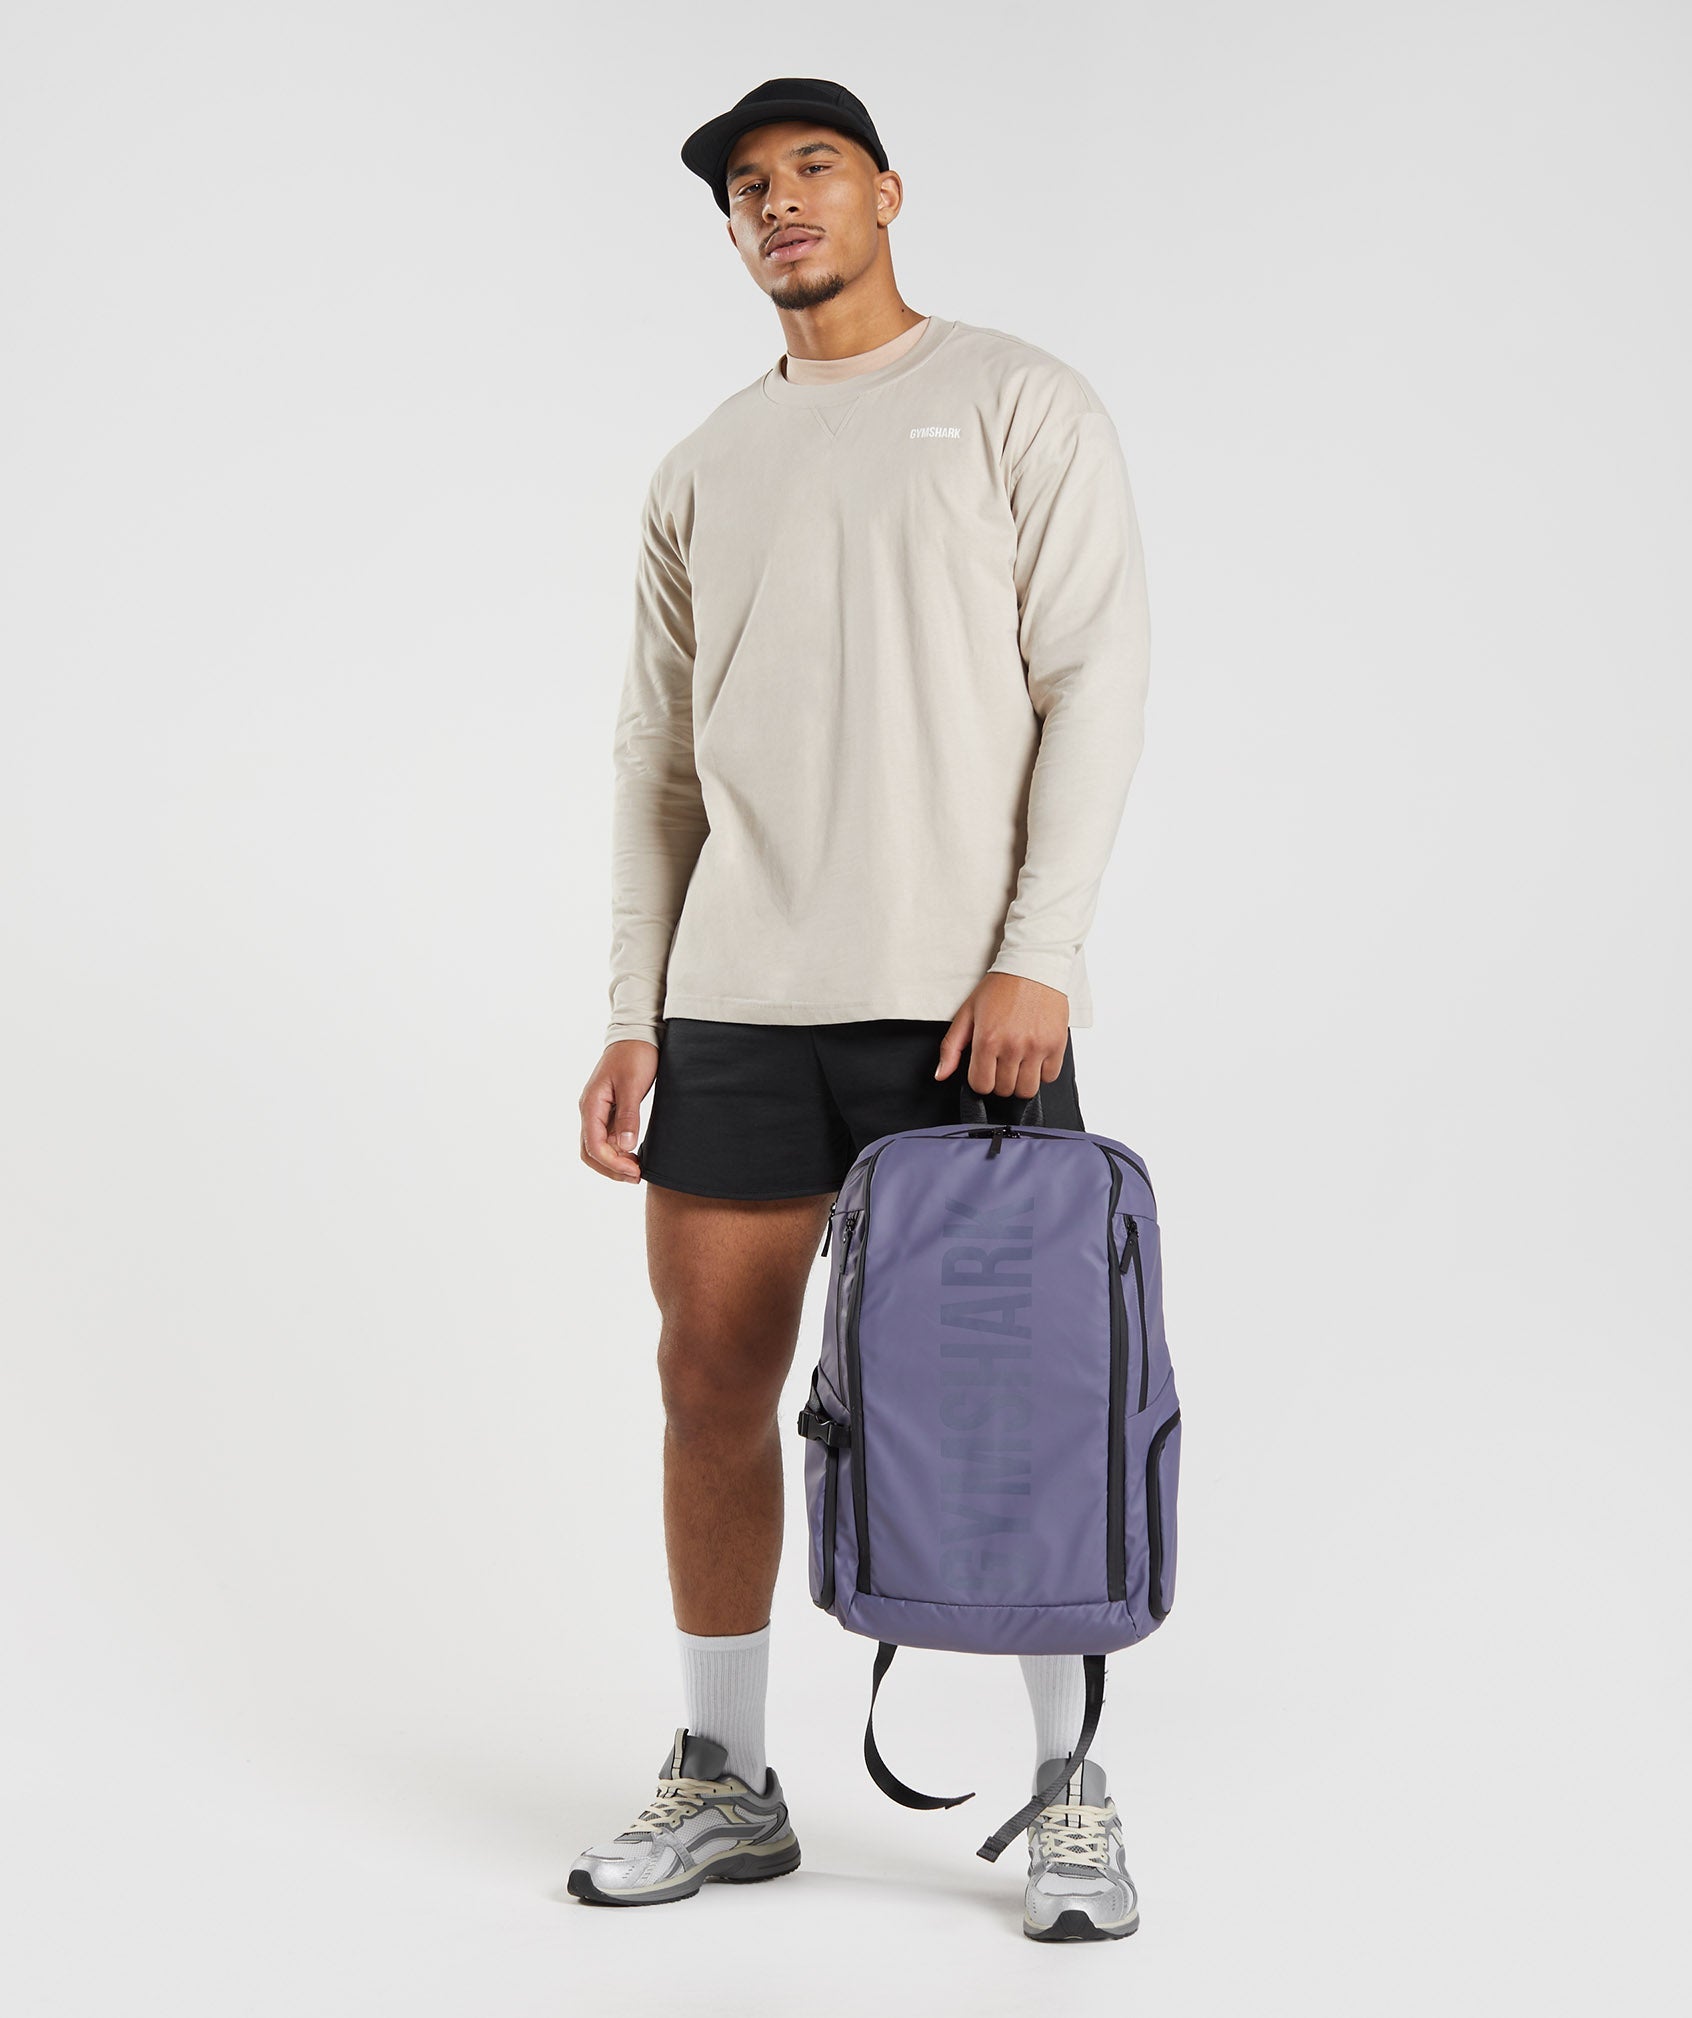 Rest Day Sweats Long Sleeve T-Shirt in Pebble Grey - view 5